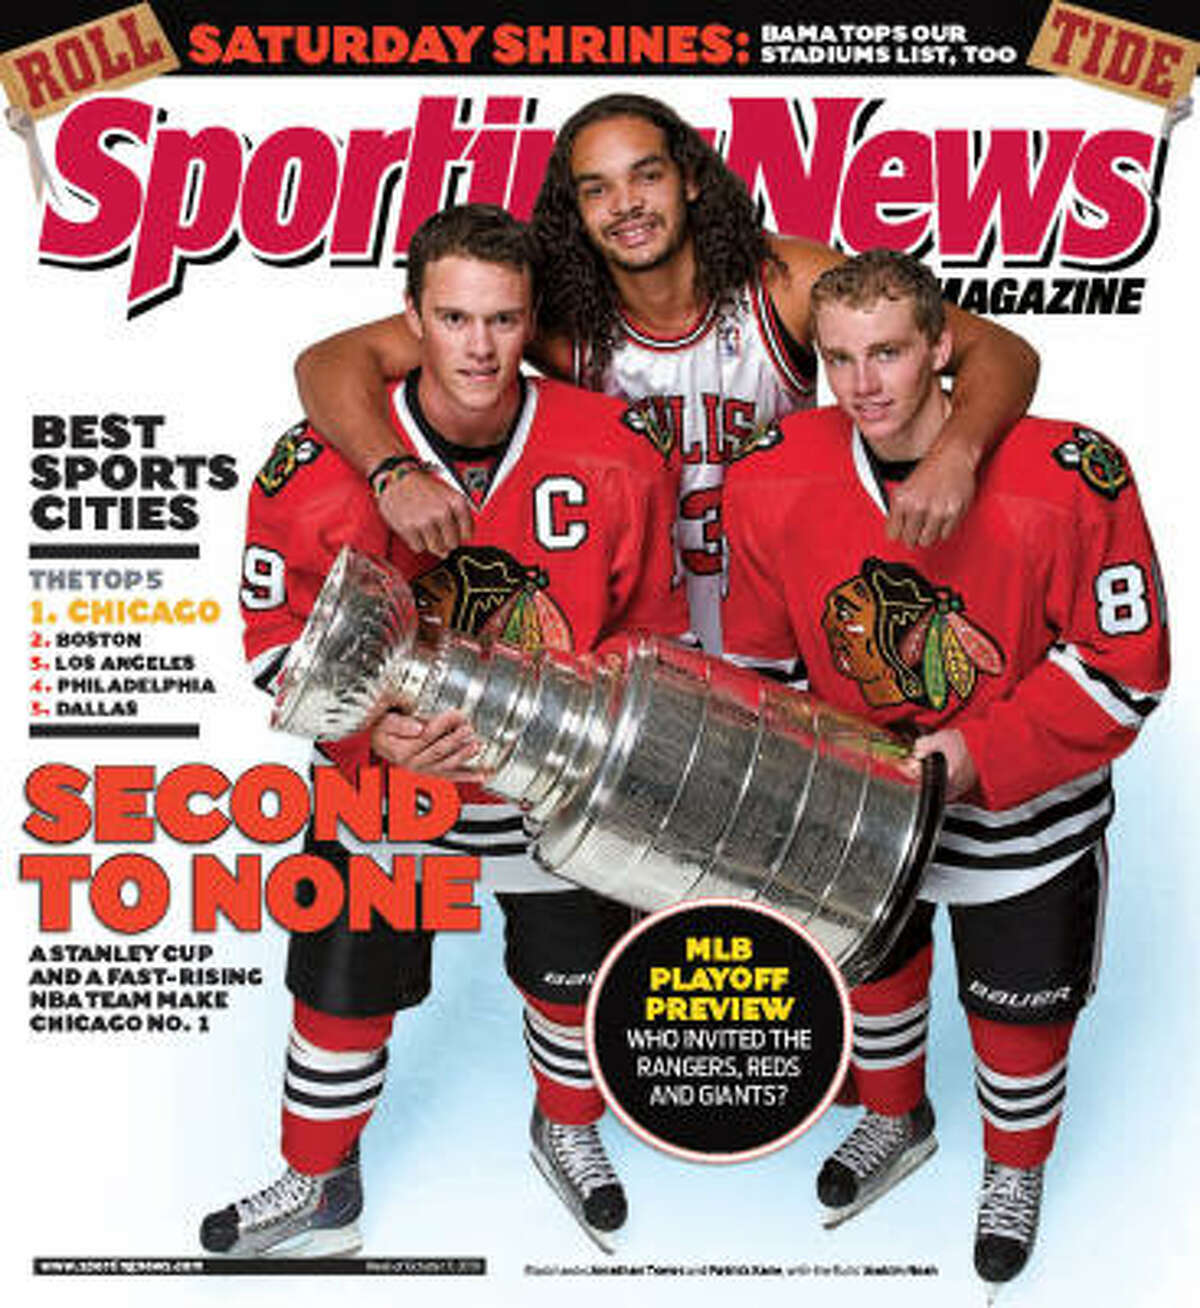 No. 1 CHICAGO + EVANSTON Chicago, with the Stanley Cup-winning Blackhawks and fast-rising Bulls leading the way, top their list. Legendary Bears linebacker and Chicago native, Dick Butkus on what makes Chicago the Best Sports City: "The Bears have had some down years, but they always sell tickets. You go to a Blackhawks game, whether they’re good or bad, the fans are there. The Bulls sucked for a while until Michael Jordan came, but we still had the team and the people would go. ... And Cubs fans ... are they nuts? Why do they go there? I’ll tell you why, because they represent their city. ...There’s plenty to do in Chicago, too. The people there don’t have to go through the hassle of attending games, but they always do anyway."